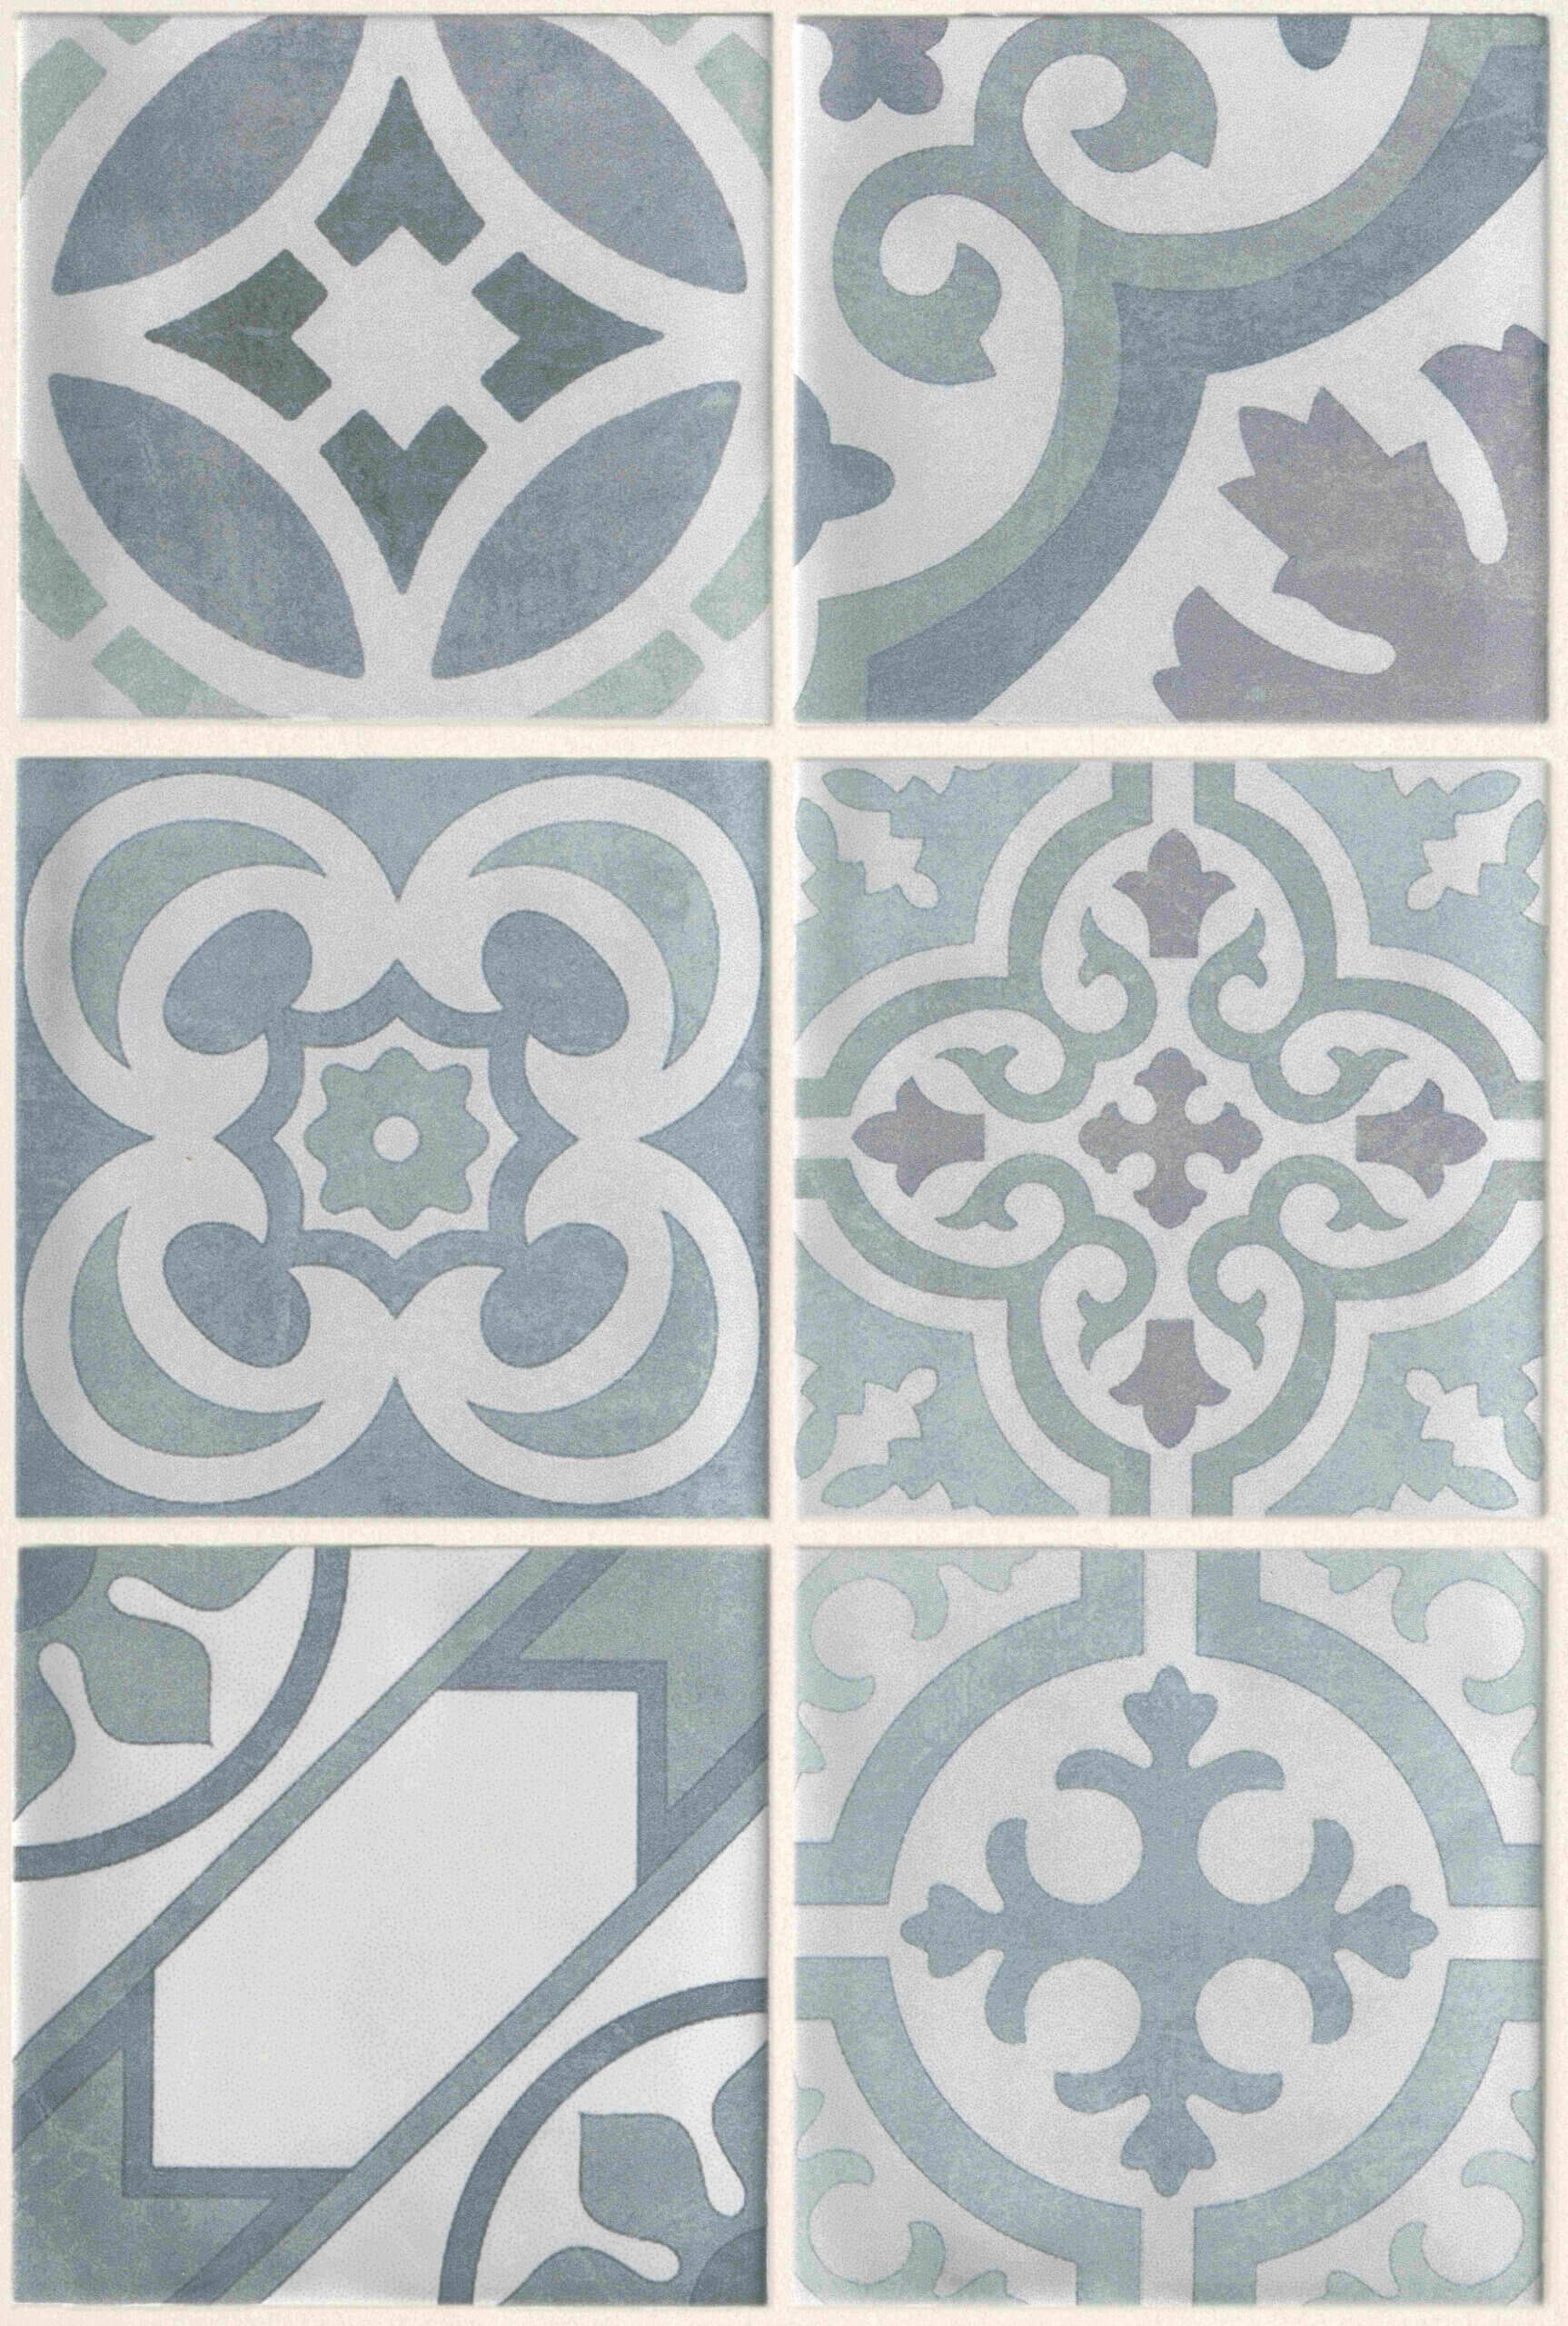 Cement Tile Wall Cladding